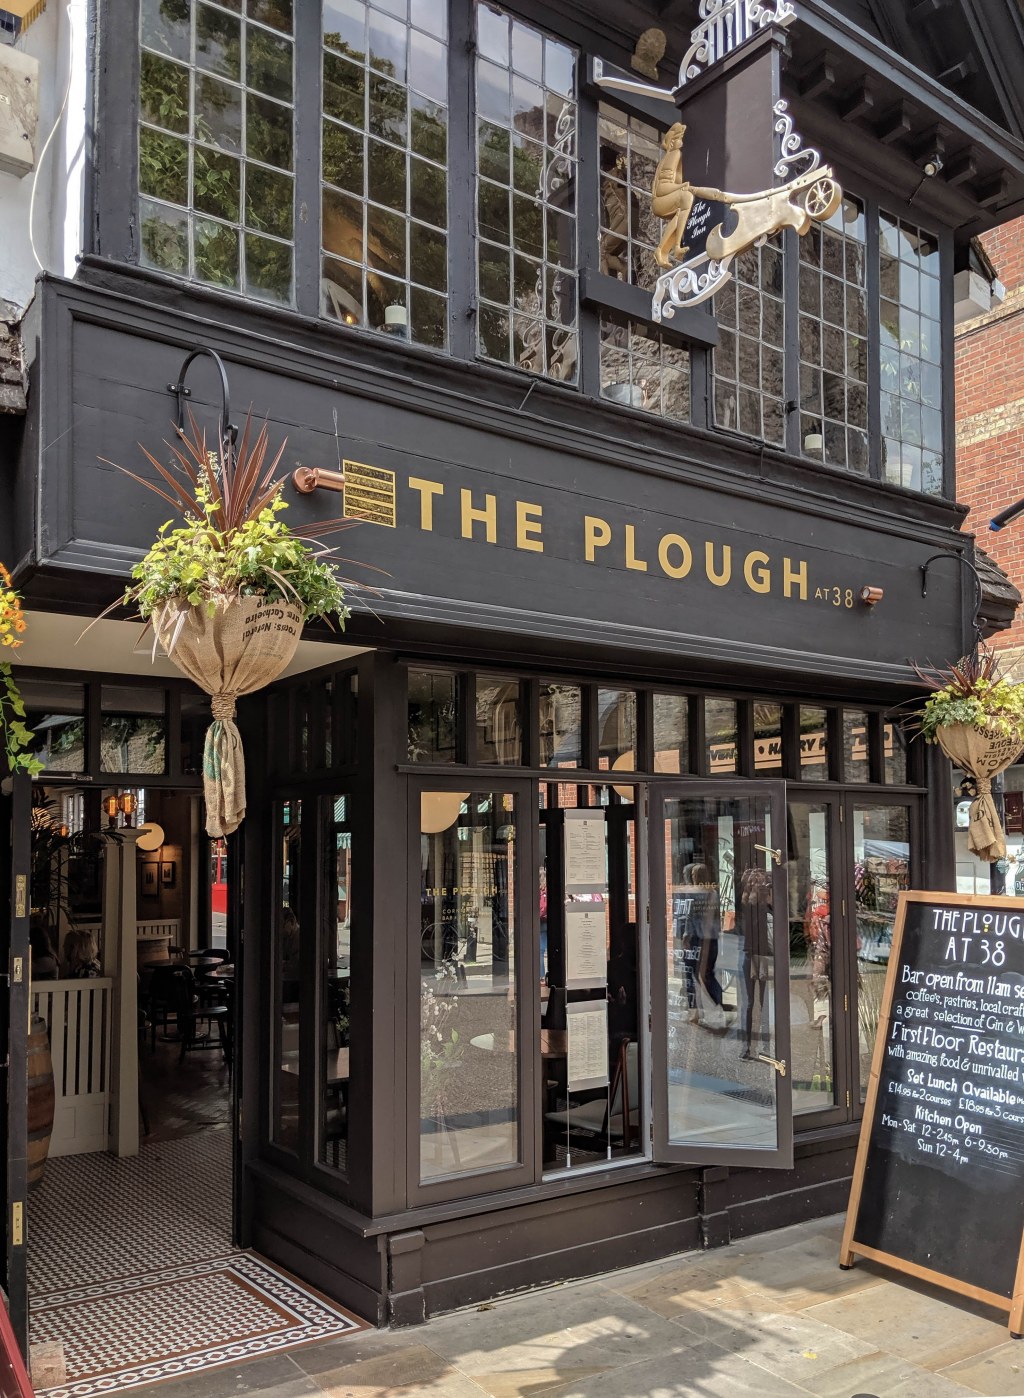 The Plough, Central Oxford / Exterior view of main entrance from Cornmarket Street